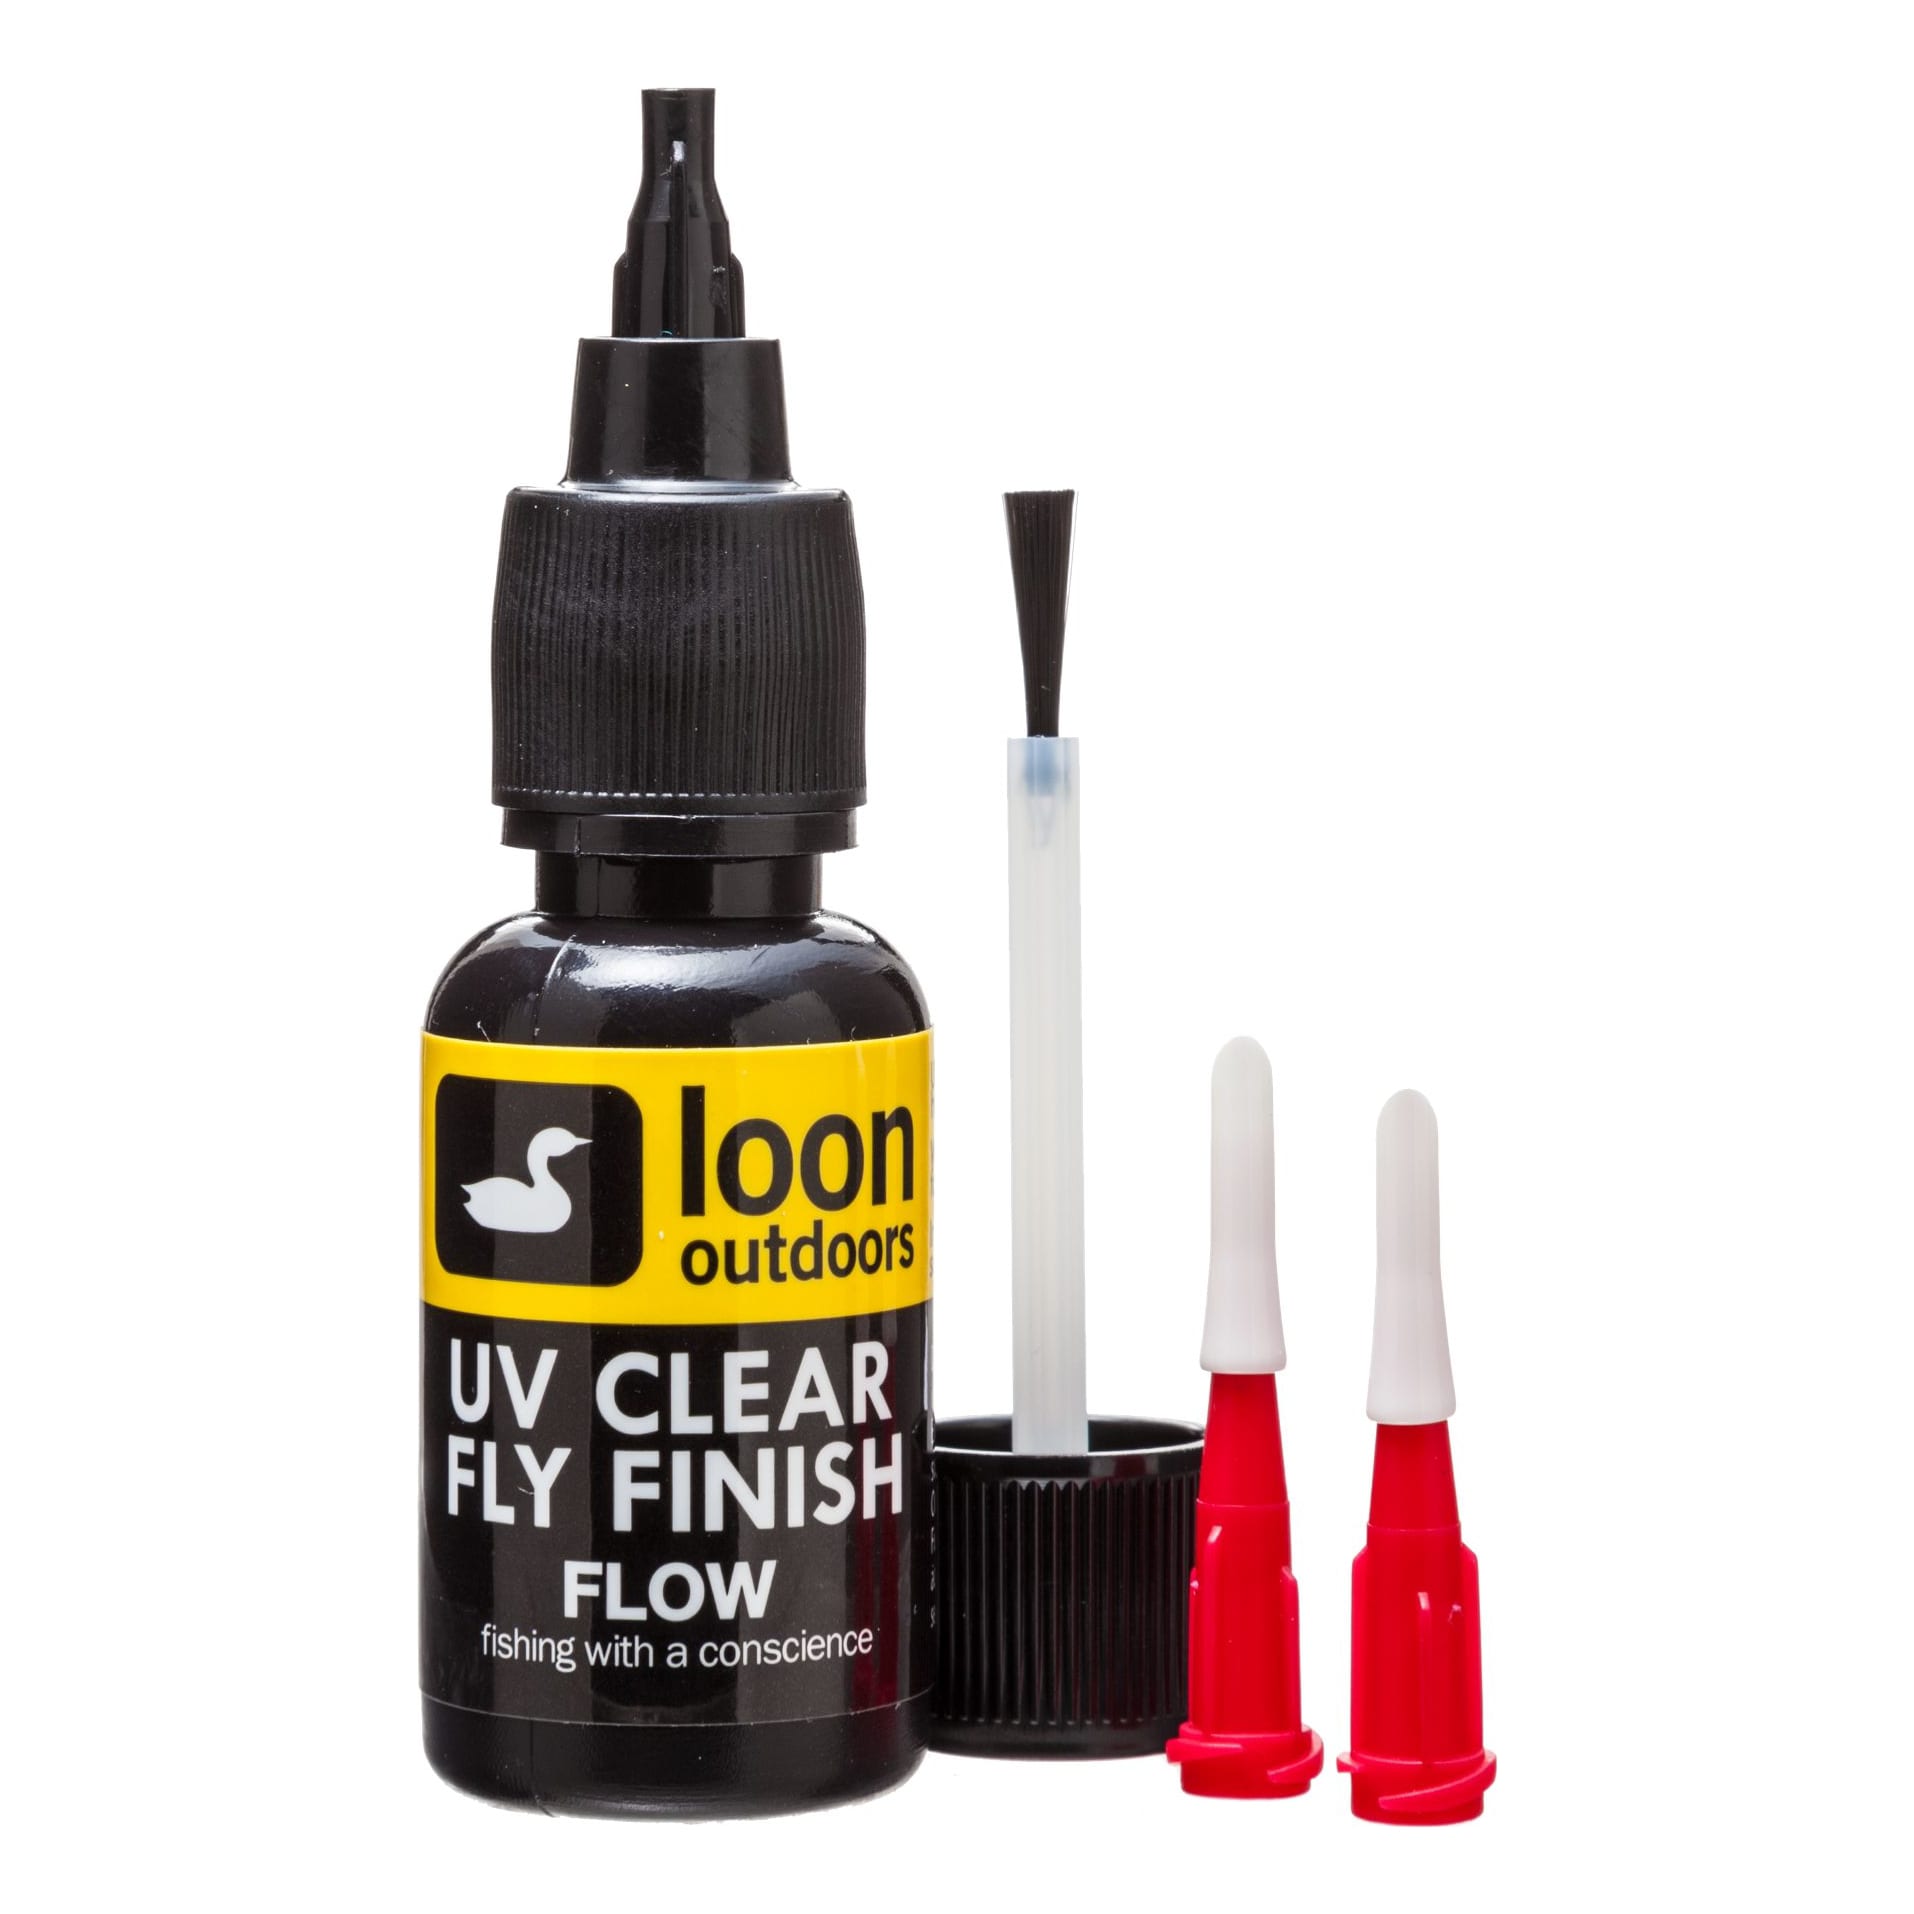 Loon Outdoors UV Clear Fly Finish - Flow